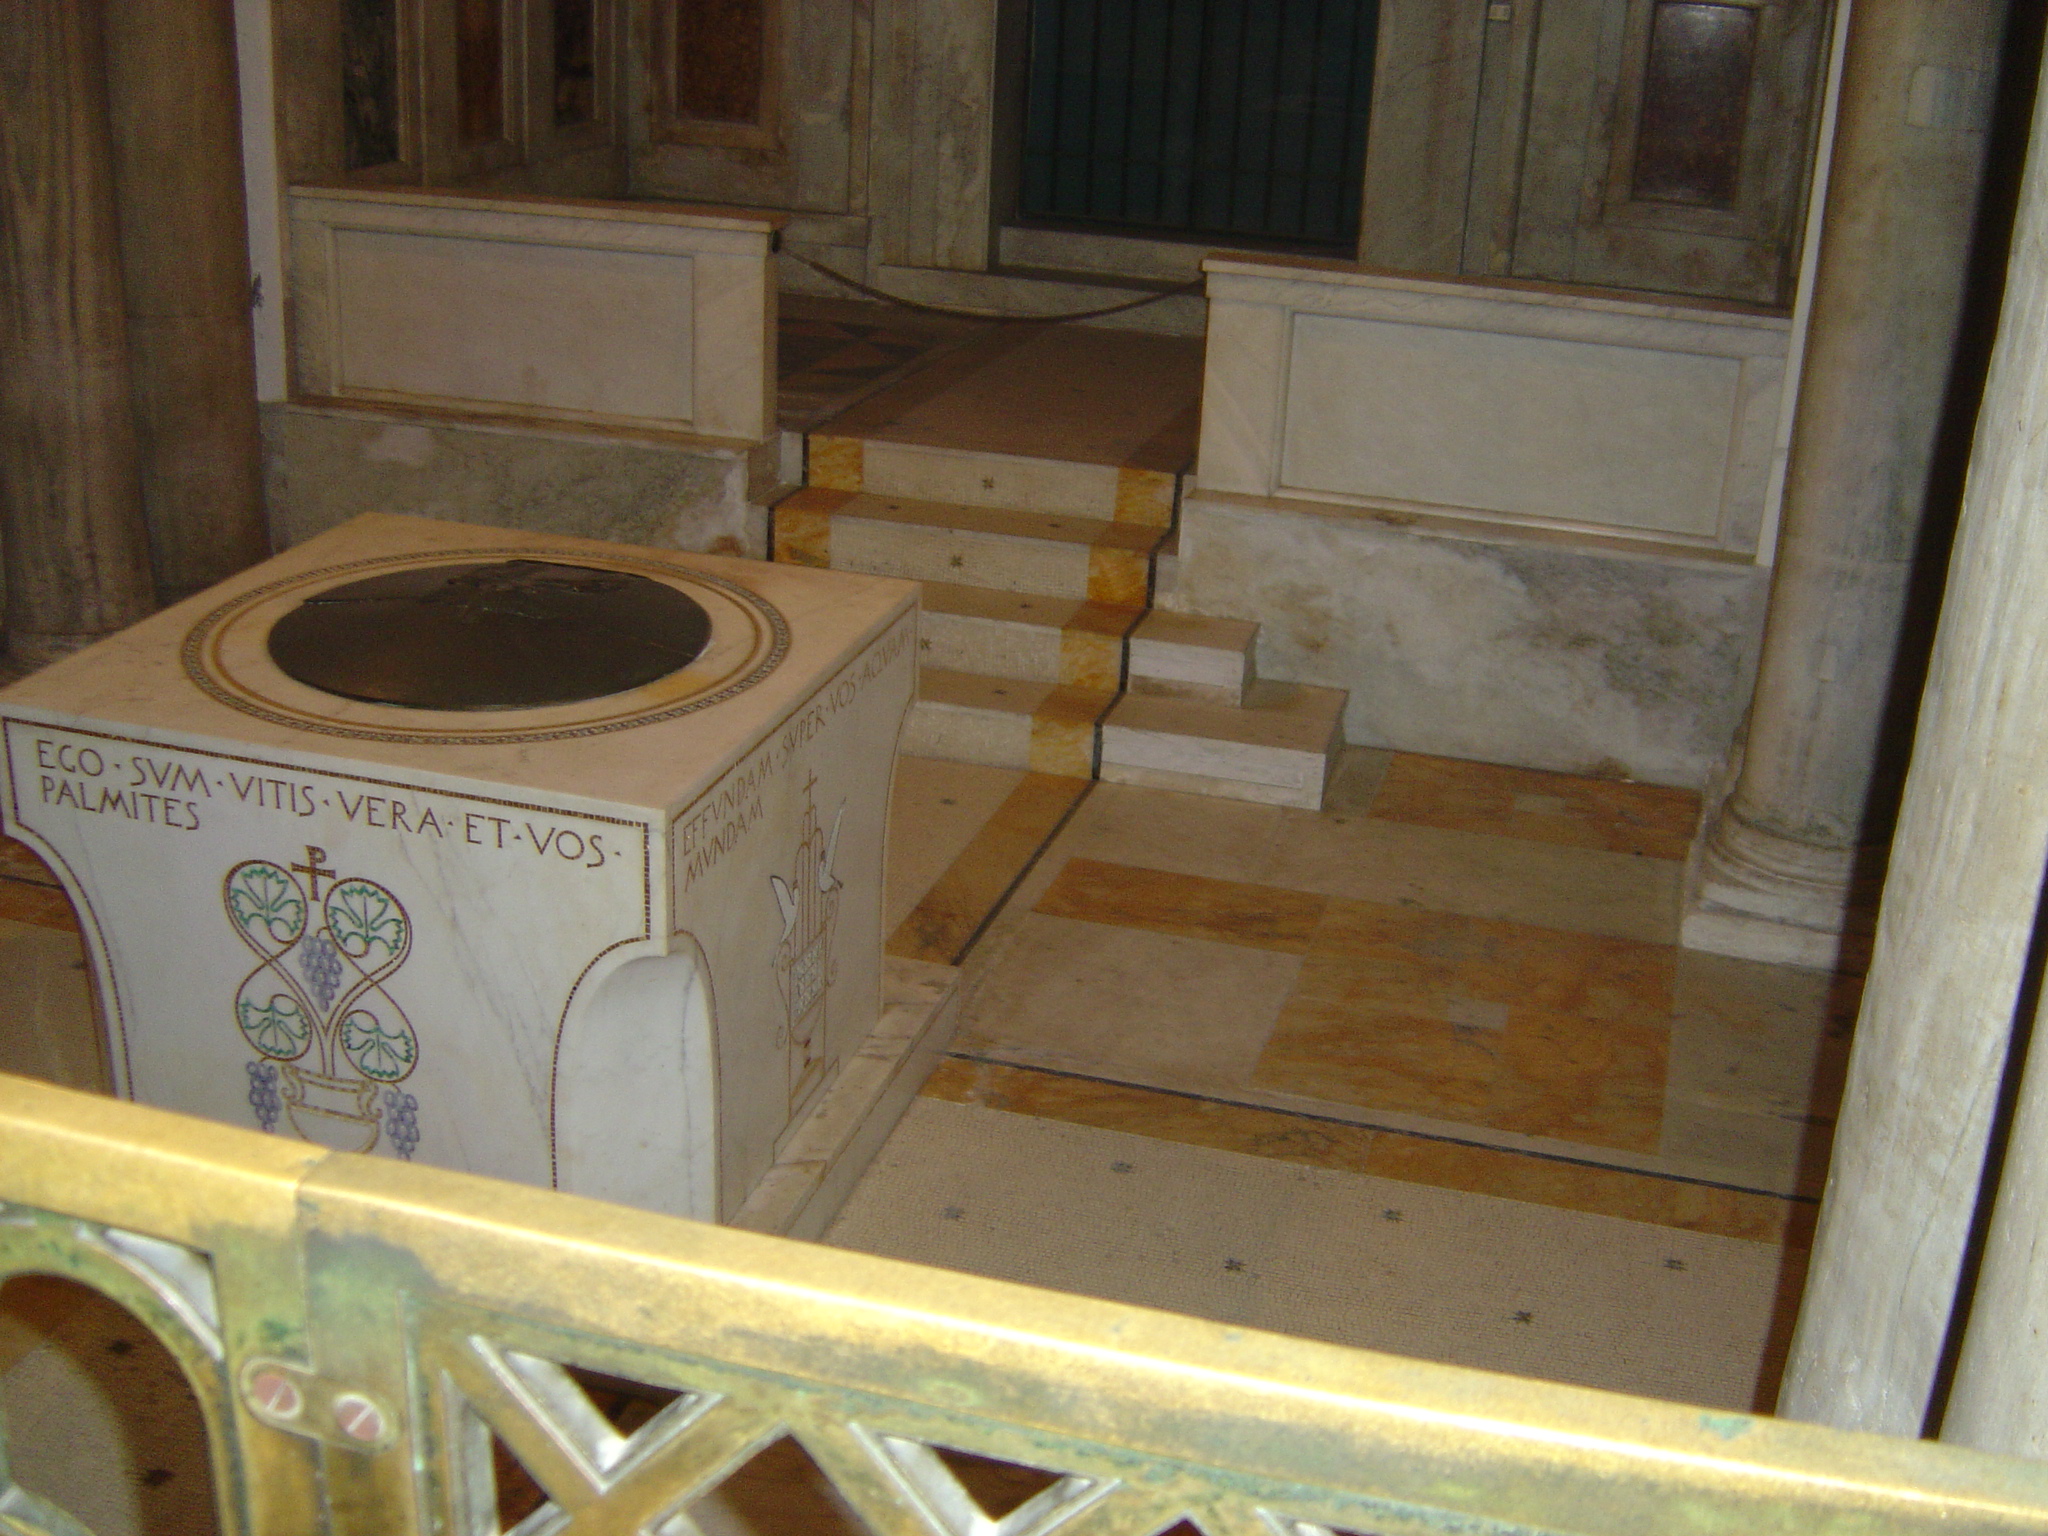 An ancient baptistry in the Basilica of St. Paul's-Outside-the-Walls.